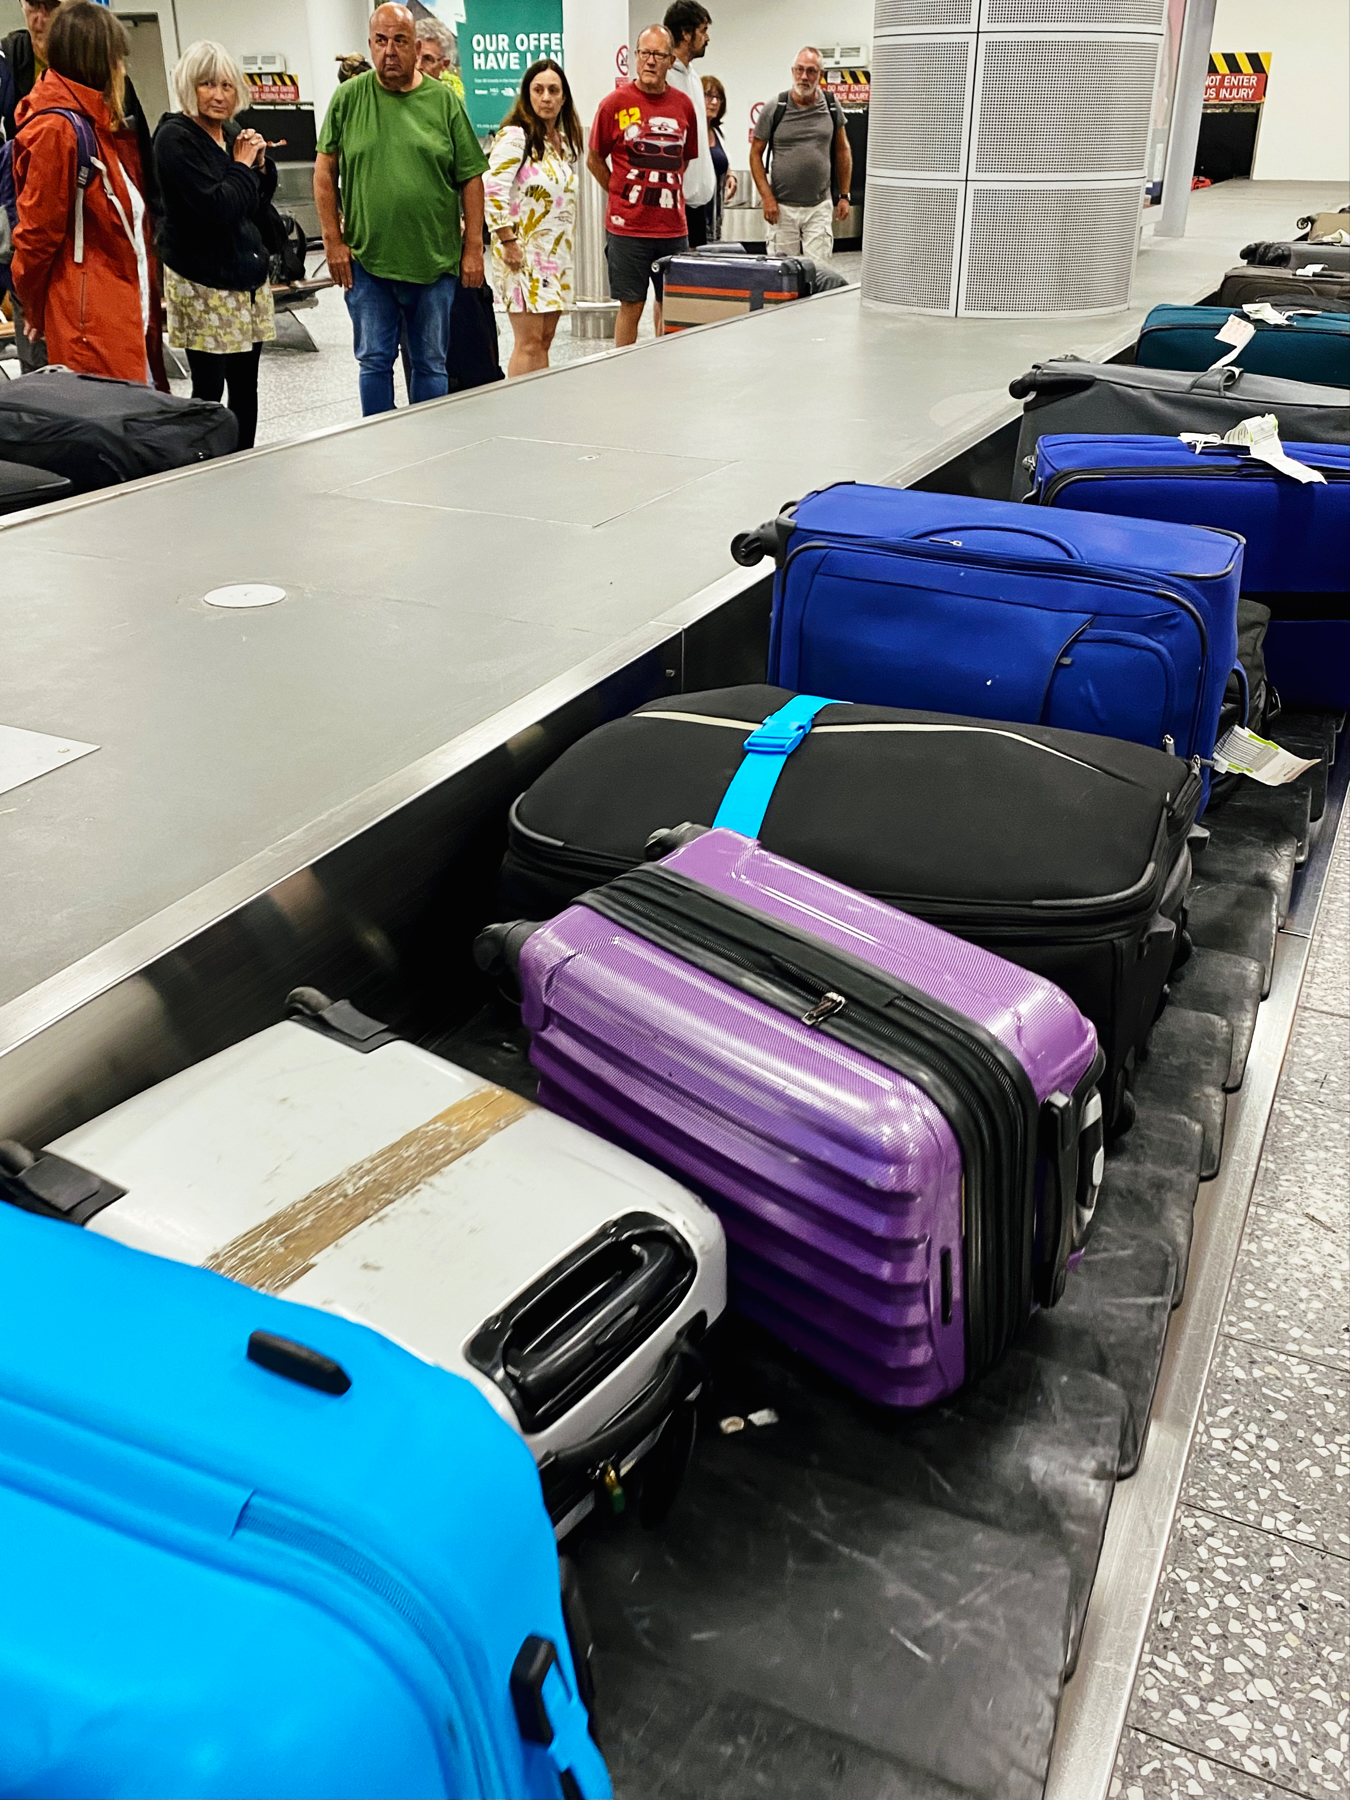 Multicoloured suitcases on an airport luggage conveyor belt